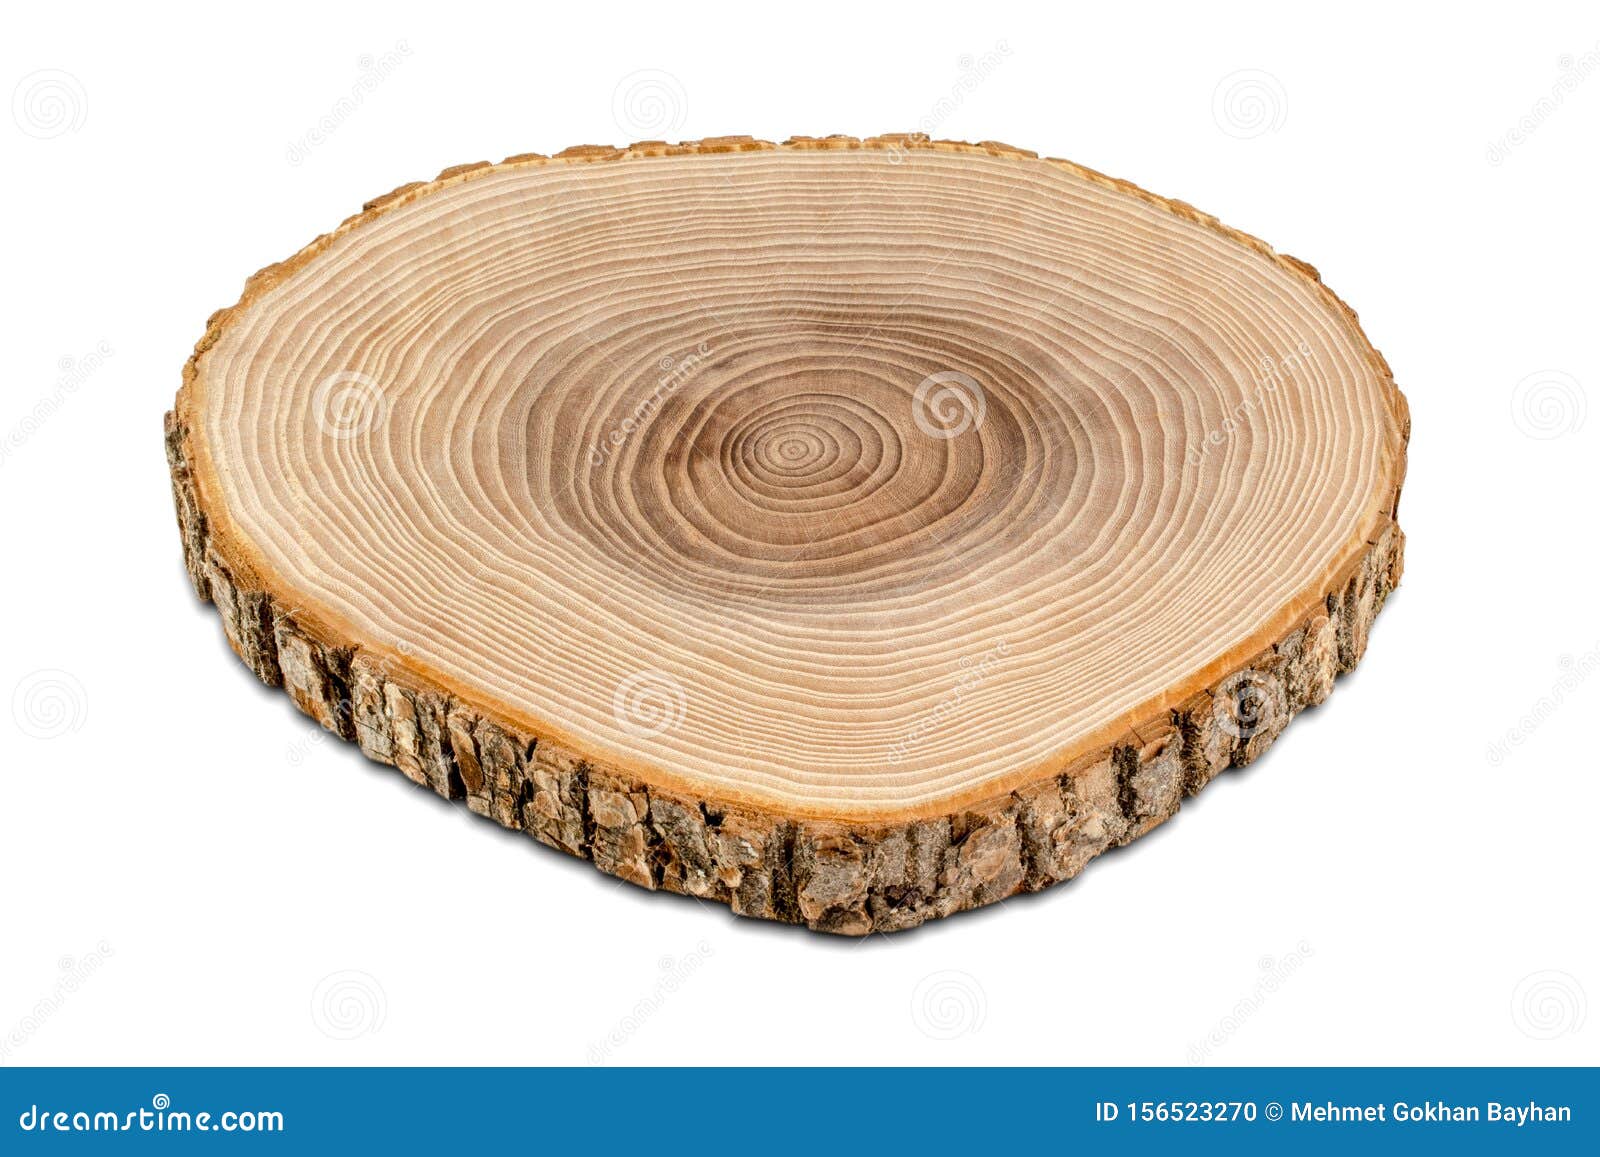 wood cross section. sliced tree trunk. wood texture, close-up.